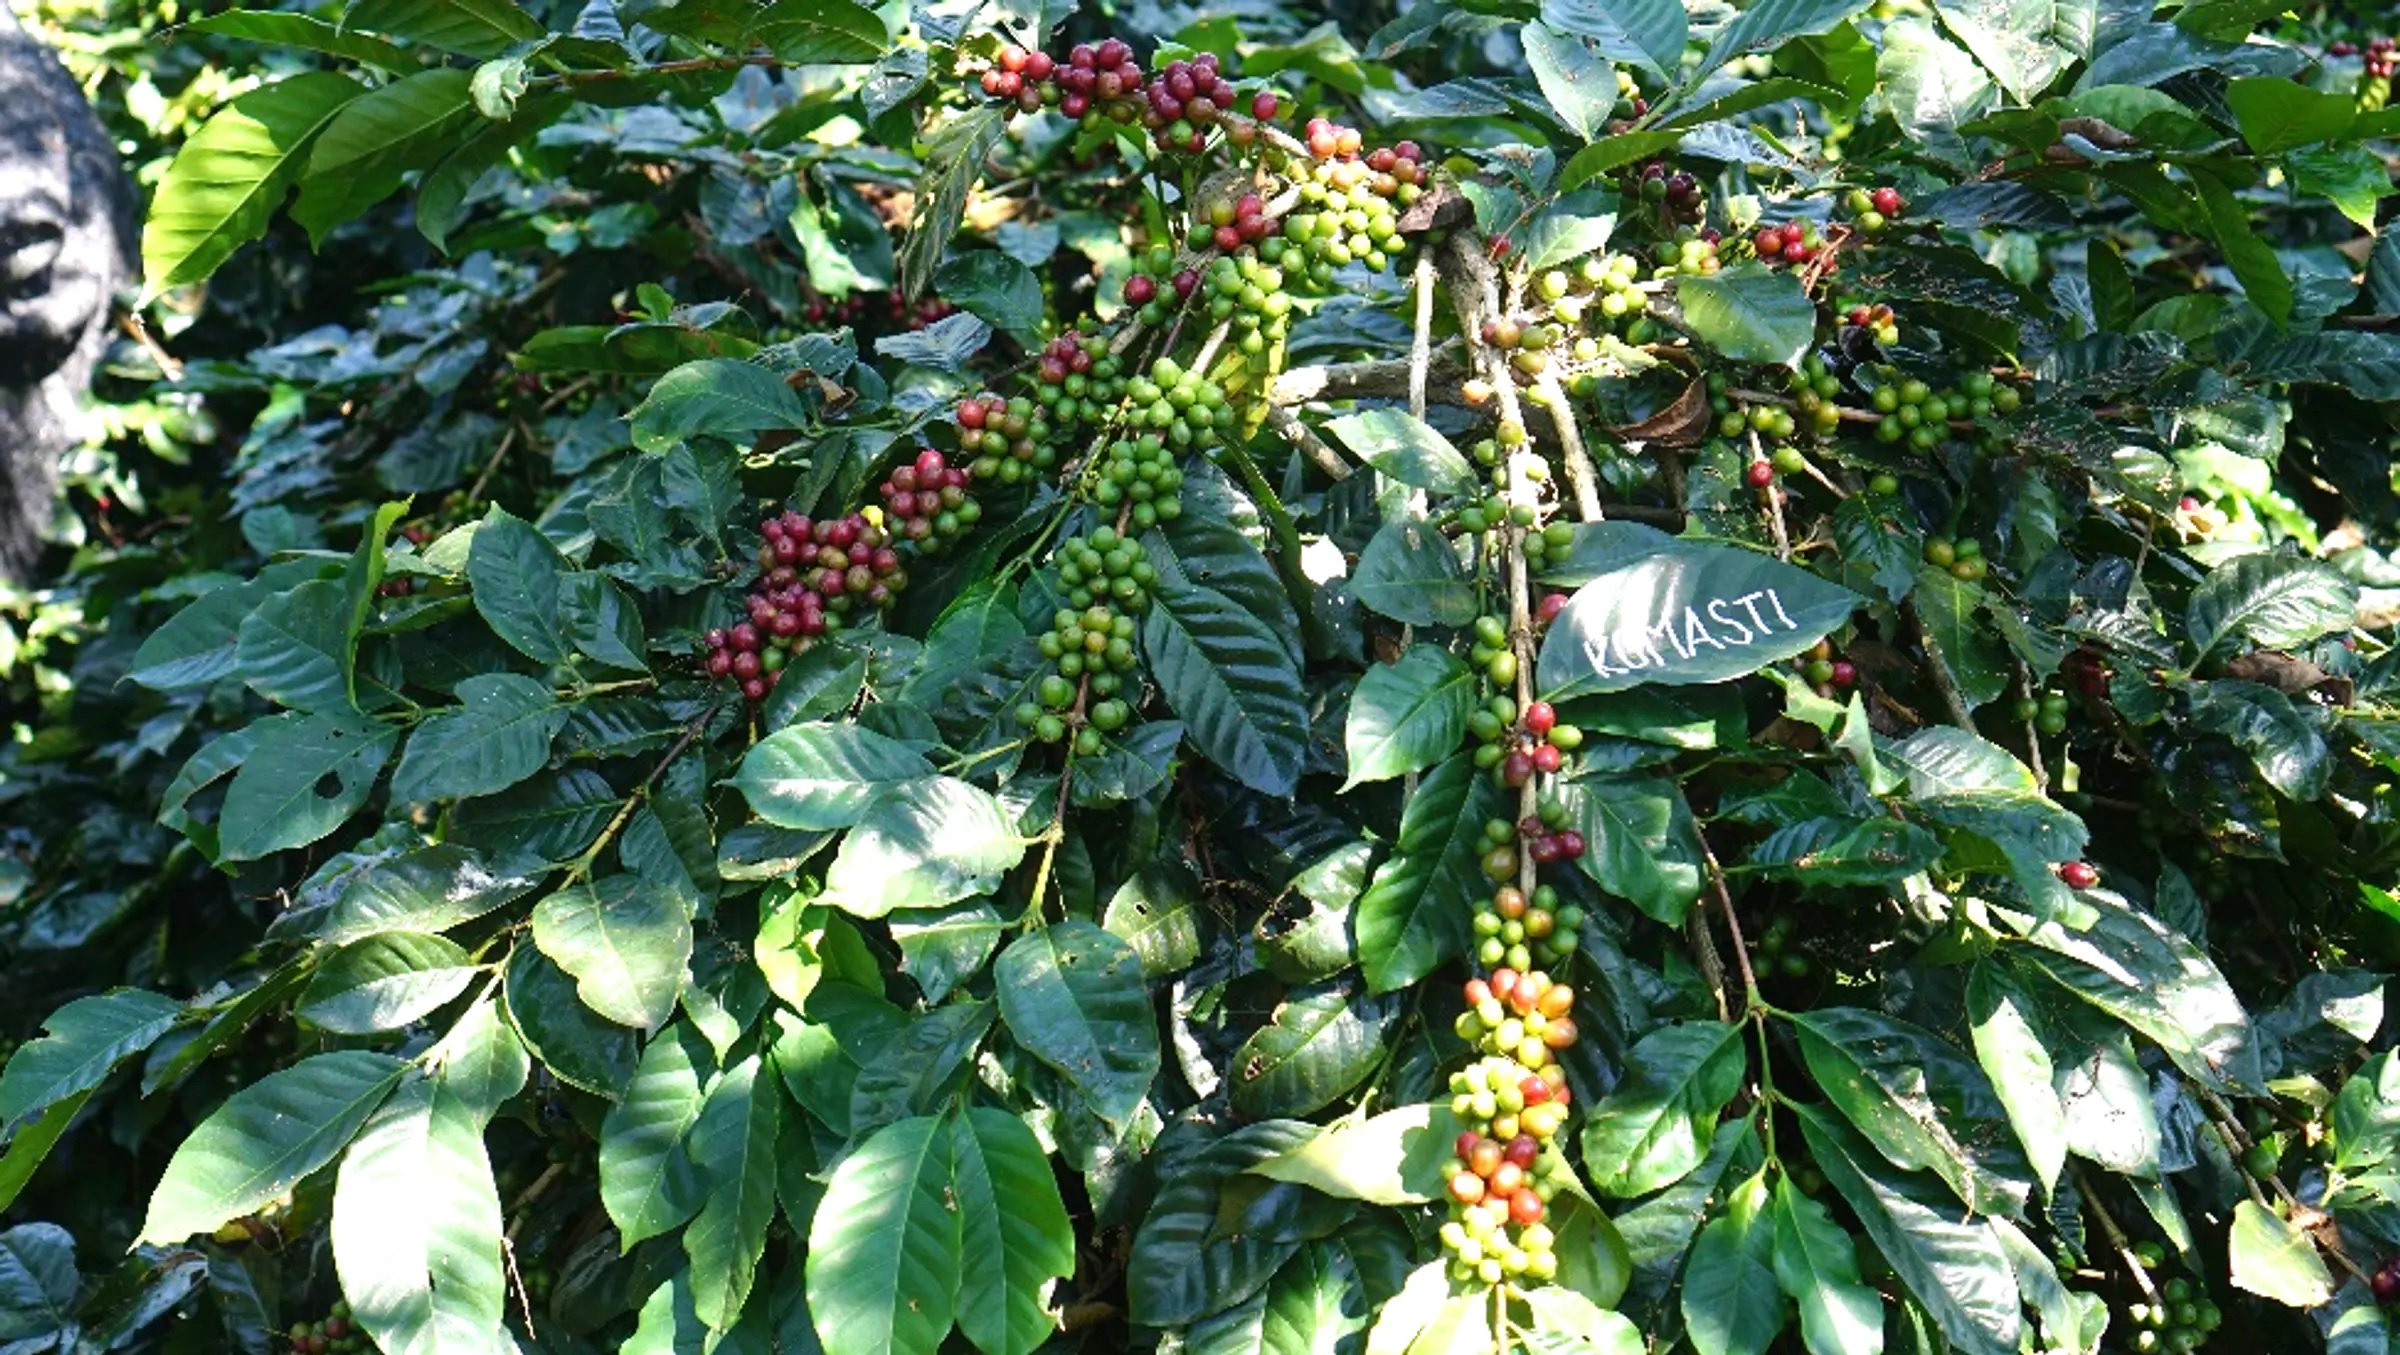 Komasti variety. Photo provided by the Indonesian Coffee and Cocoa Research Institute (ICCRI).